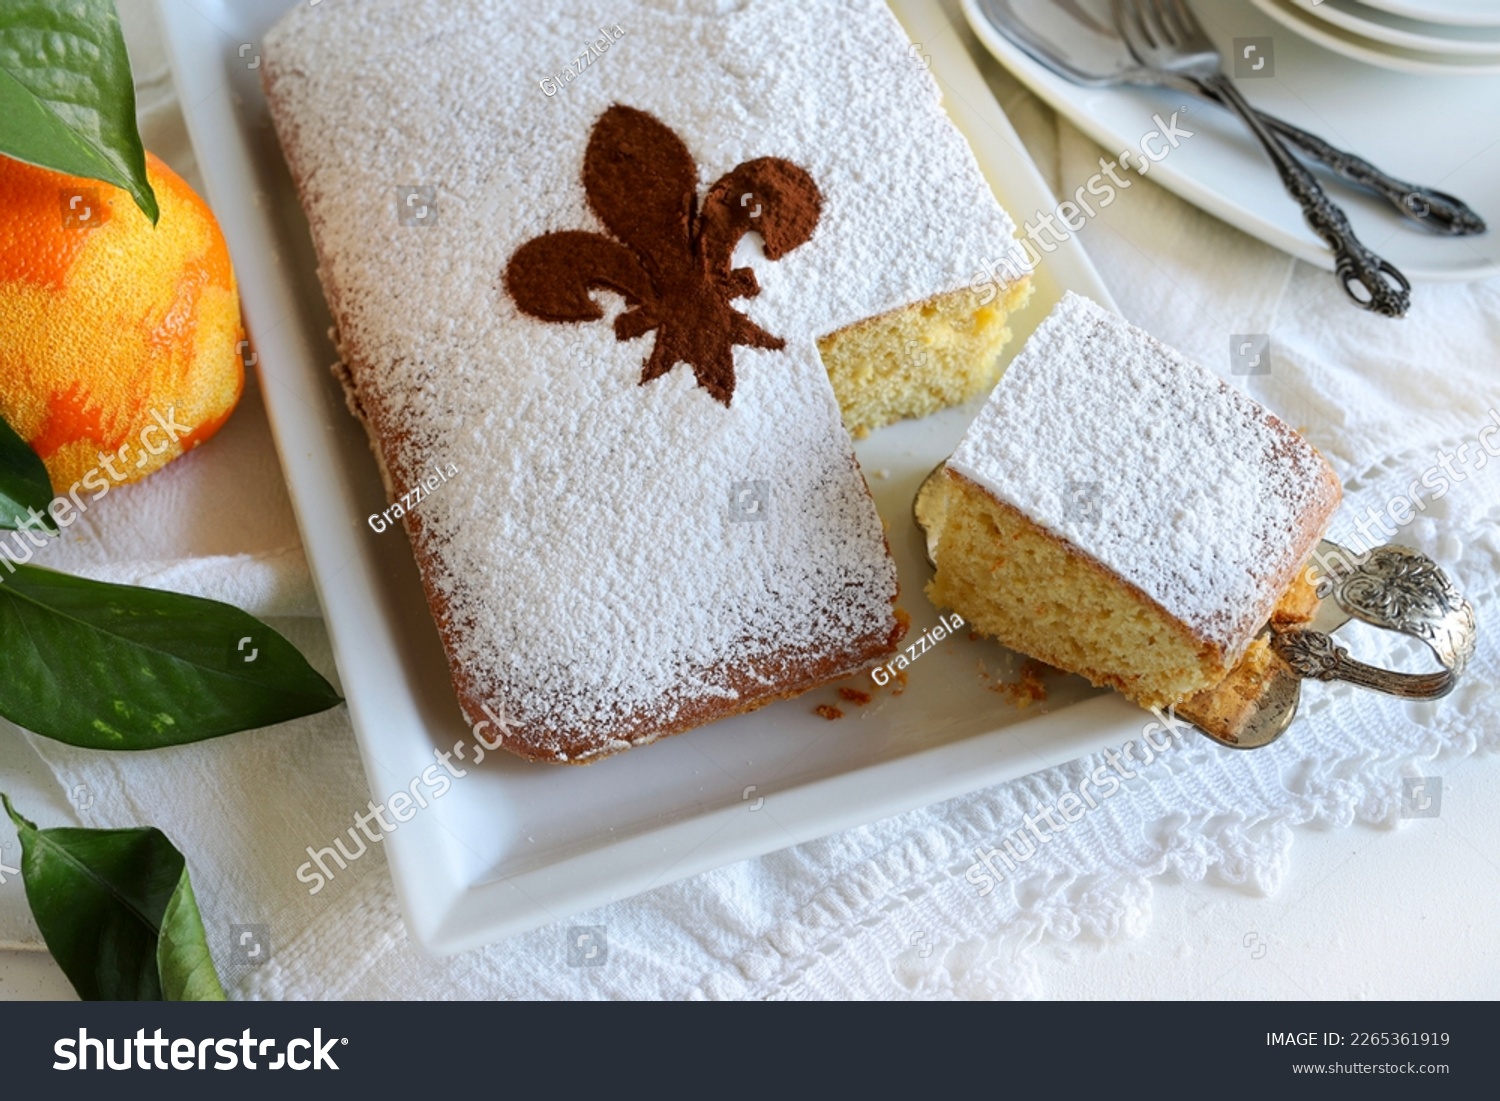 Schiacciata fiorentina, a carnival cake from Florence with orange flavor. Florentine lily on the cake sprinkled cocoa powder. Directly above. #2265361919